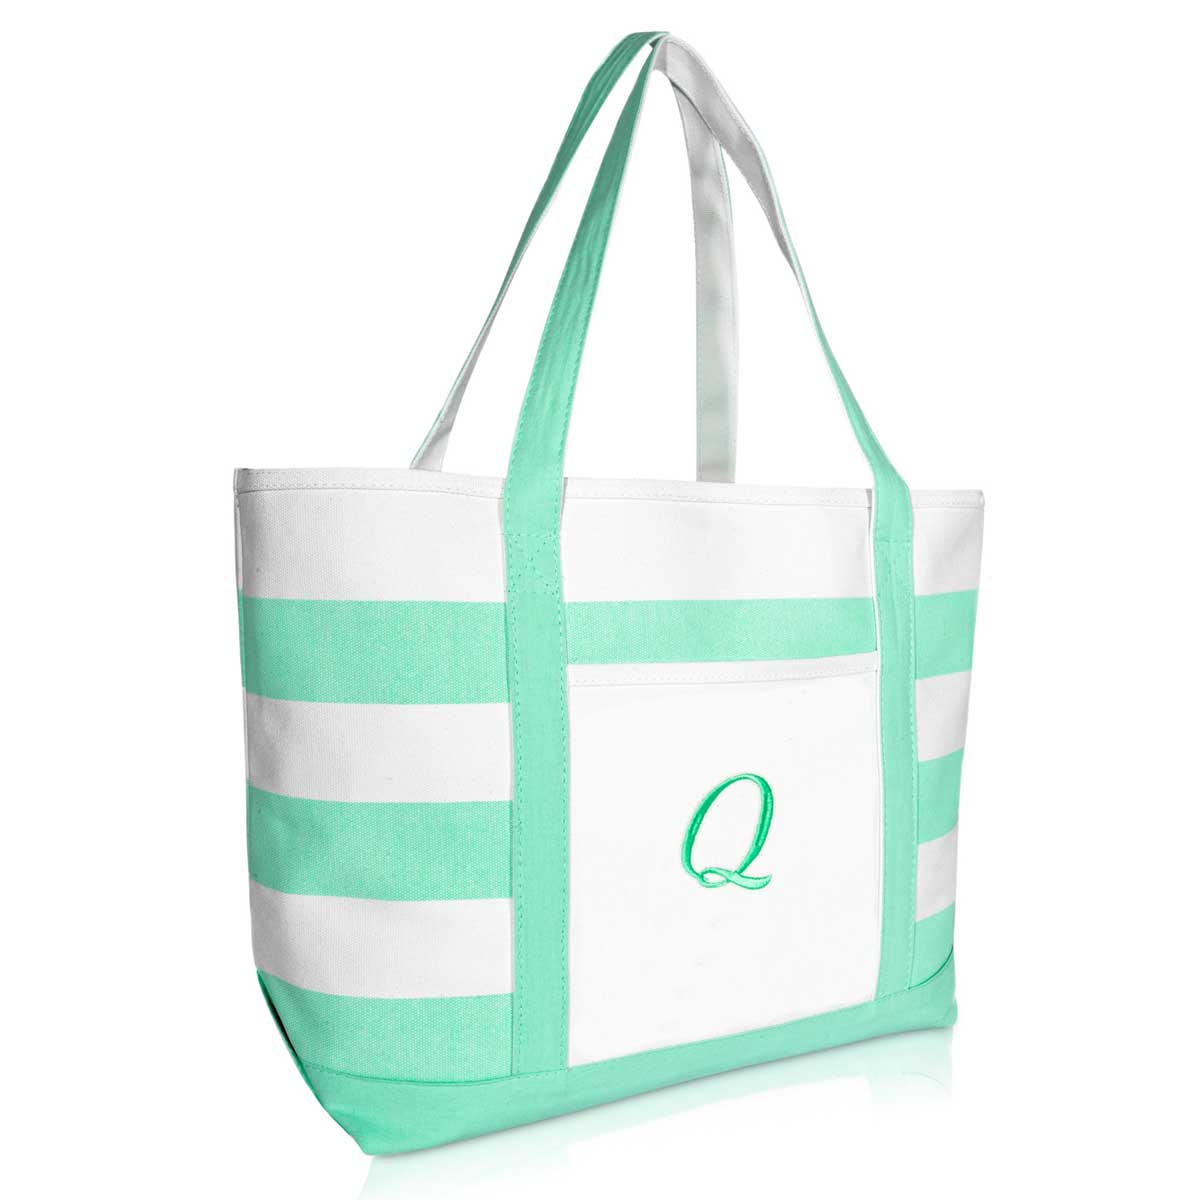 Personalized Initial Canvas Tote Bag, Monogrammed Beach Bag for